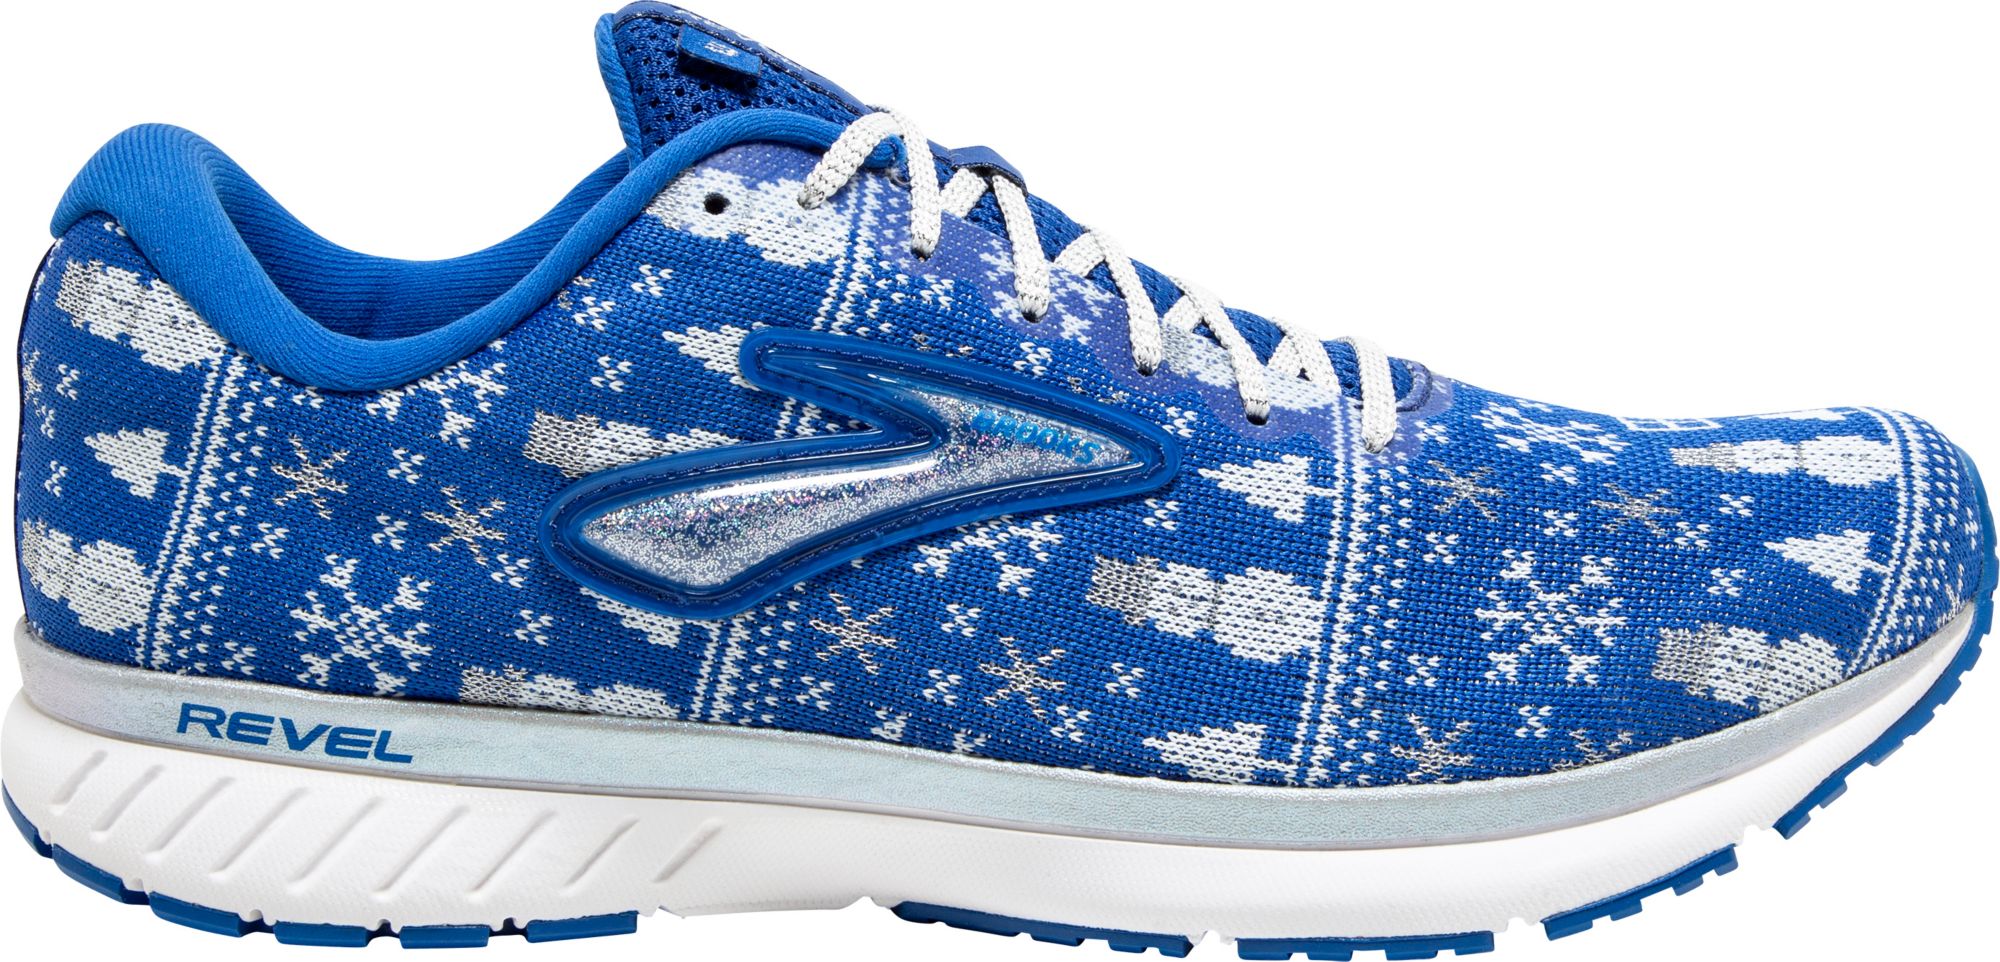 brooks ugly sweater running shoes